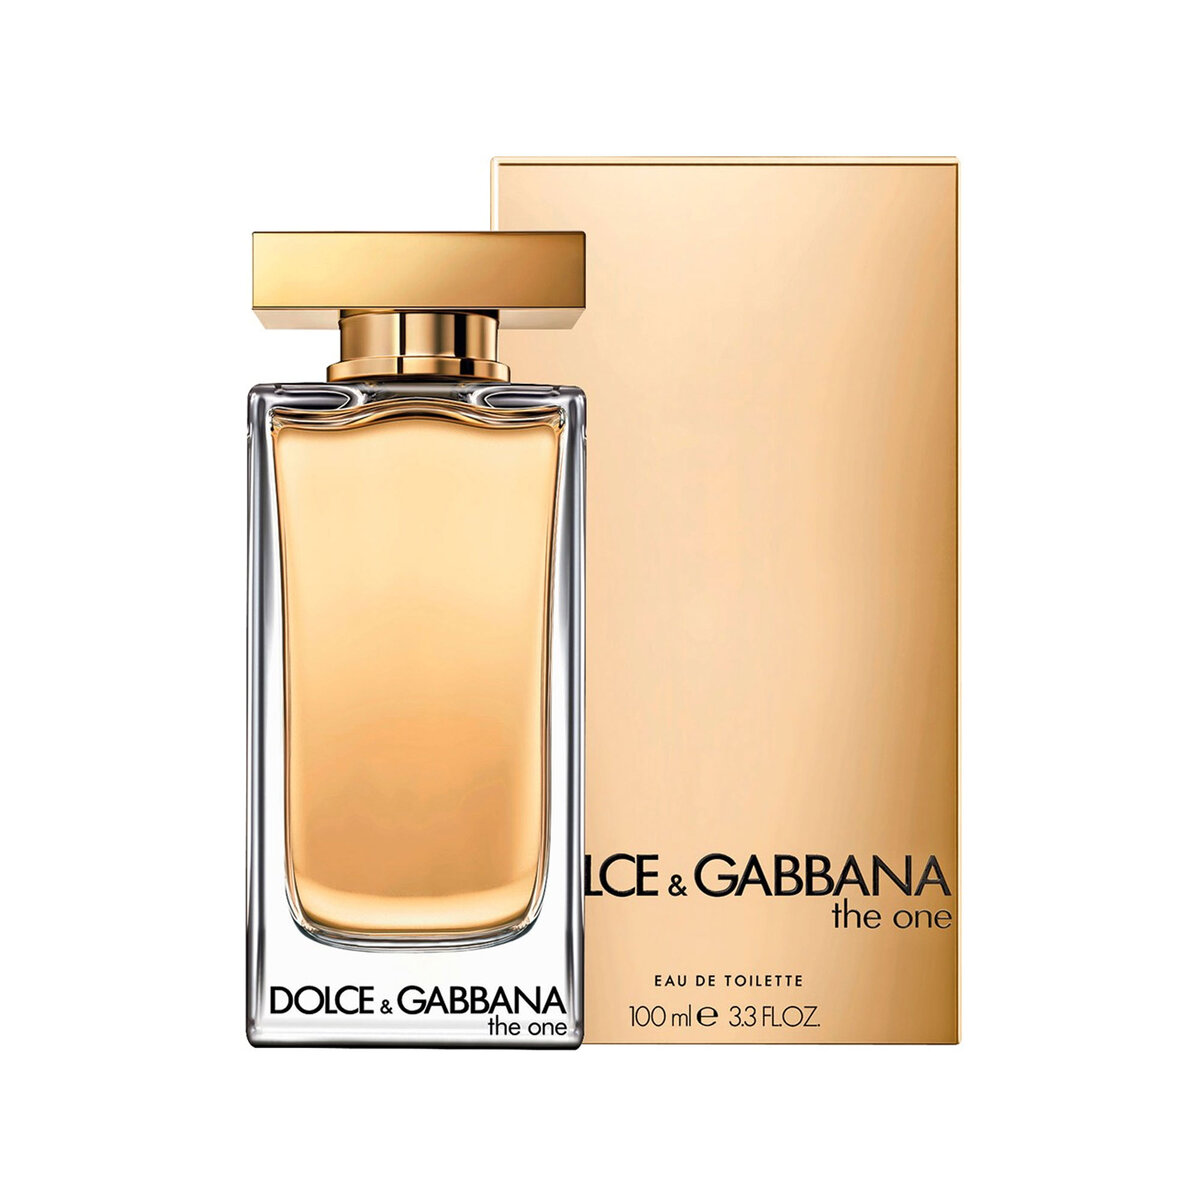 Dolce gabbana the one for woman. Дольче Габбана the one 100ml. Дольче и Габбана the one Toilette. Dolce Gabbana the one. Духи Дольче Габбана с бергамотом женские.